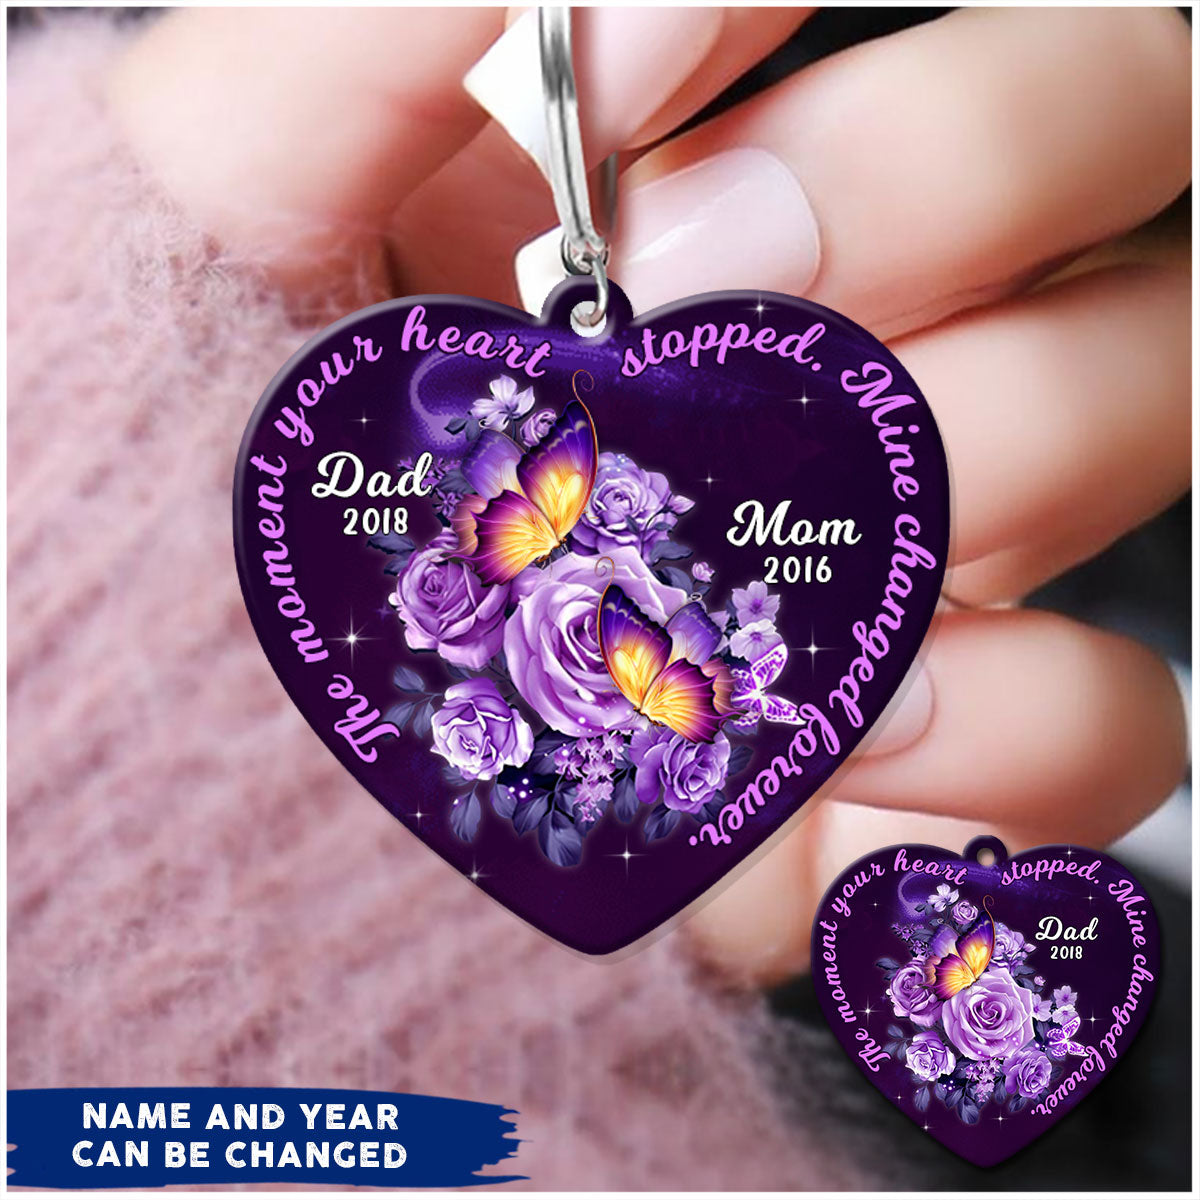 Personalized The Moment Your Heart Stopped, Mine Changed Forever Keychain